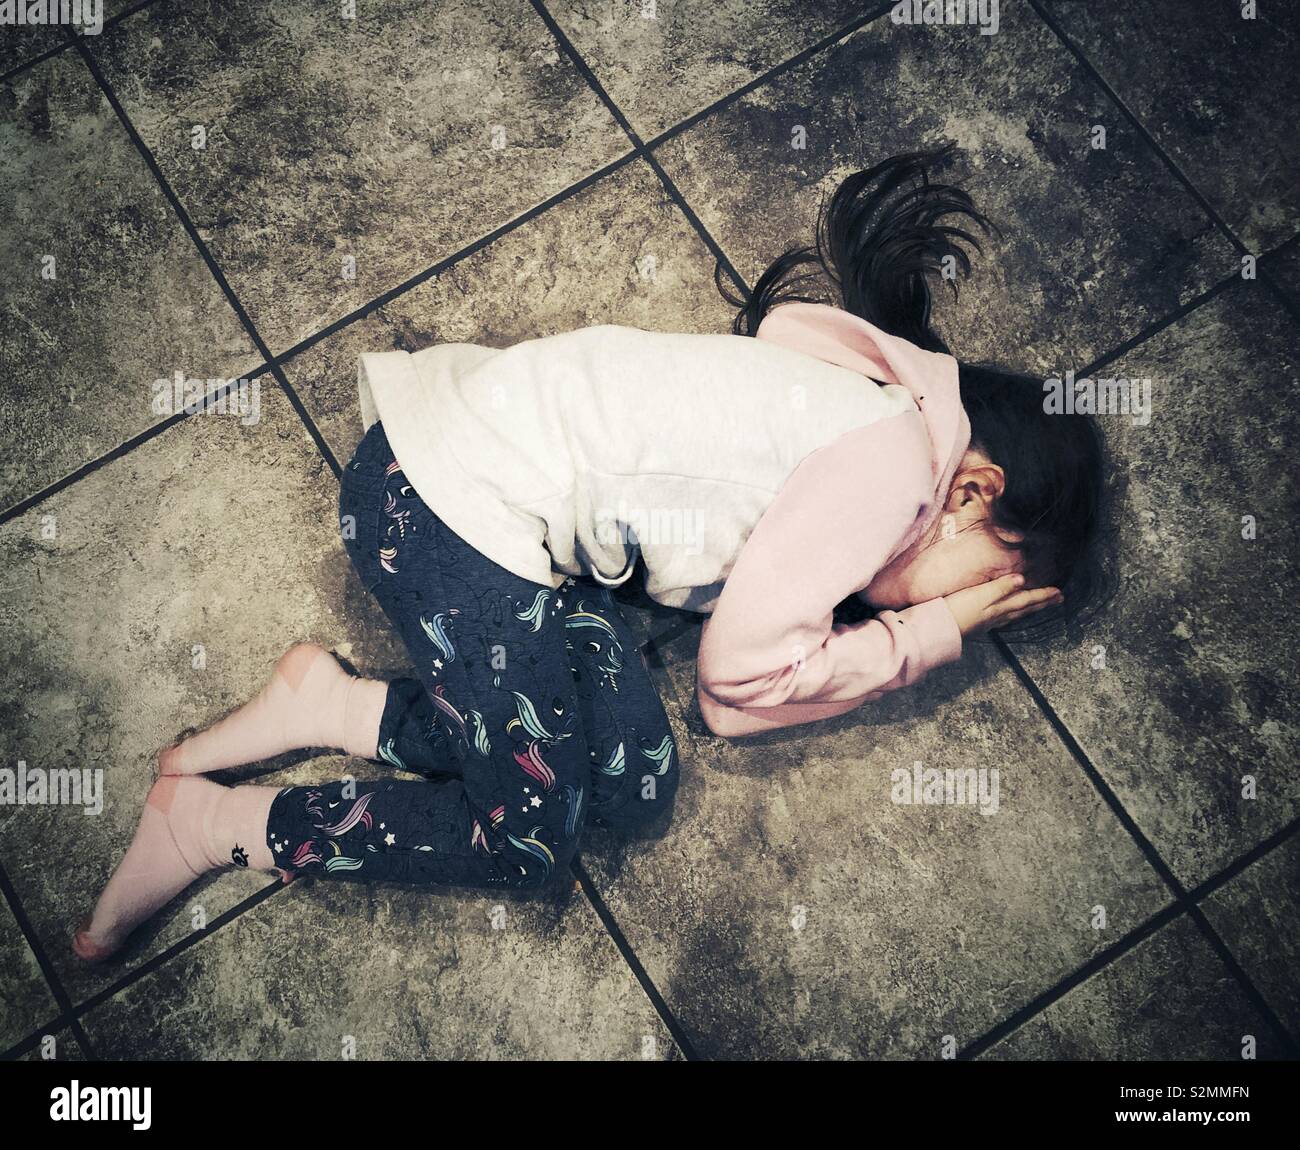 Young girl on floor covering face with hands while crying Stock Photo